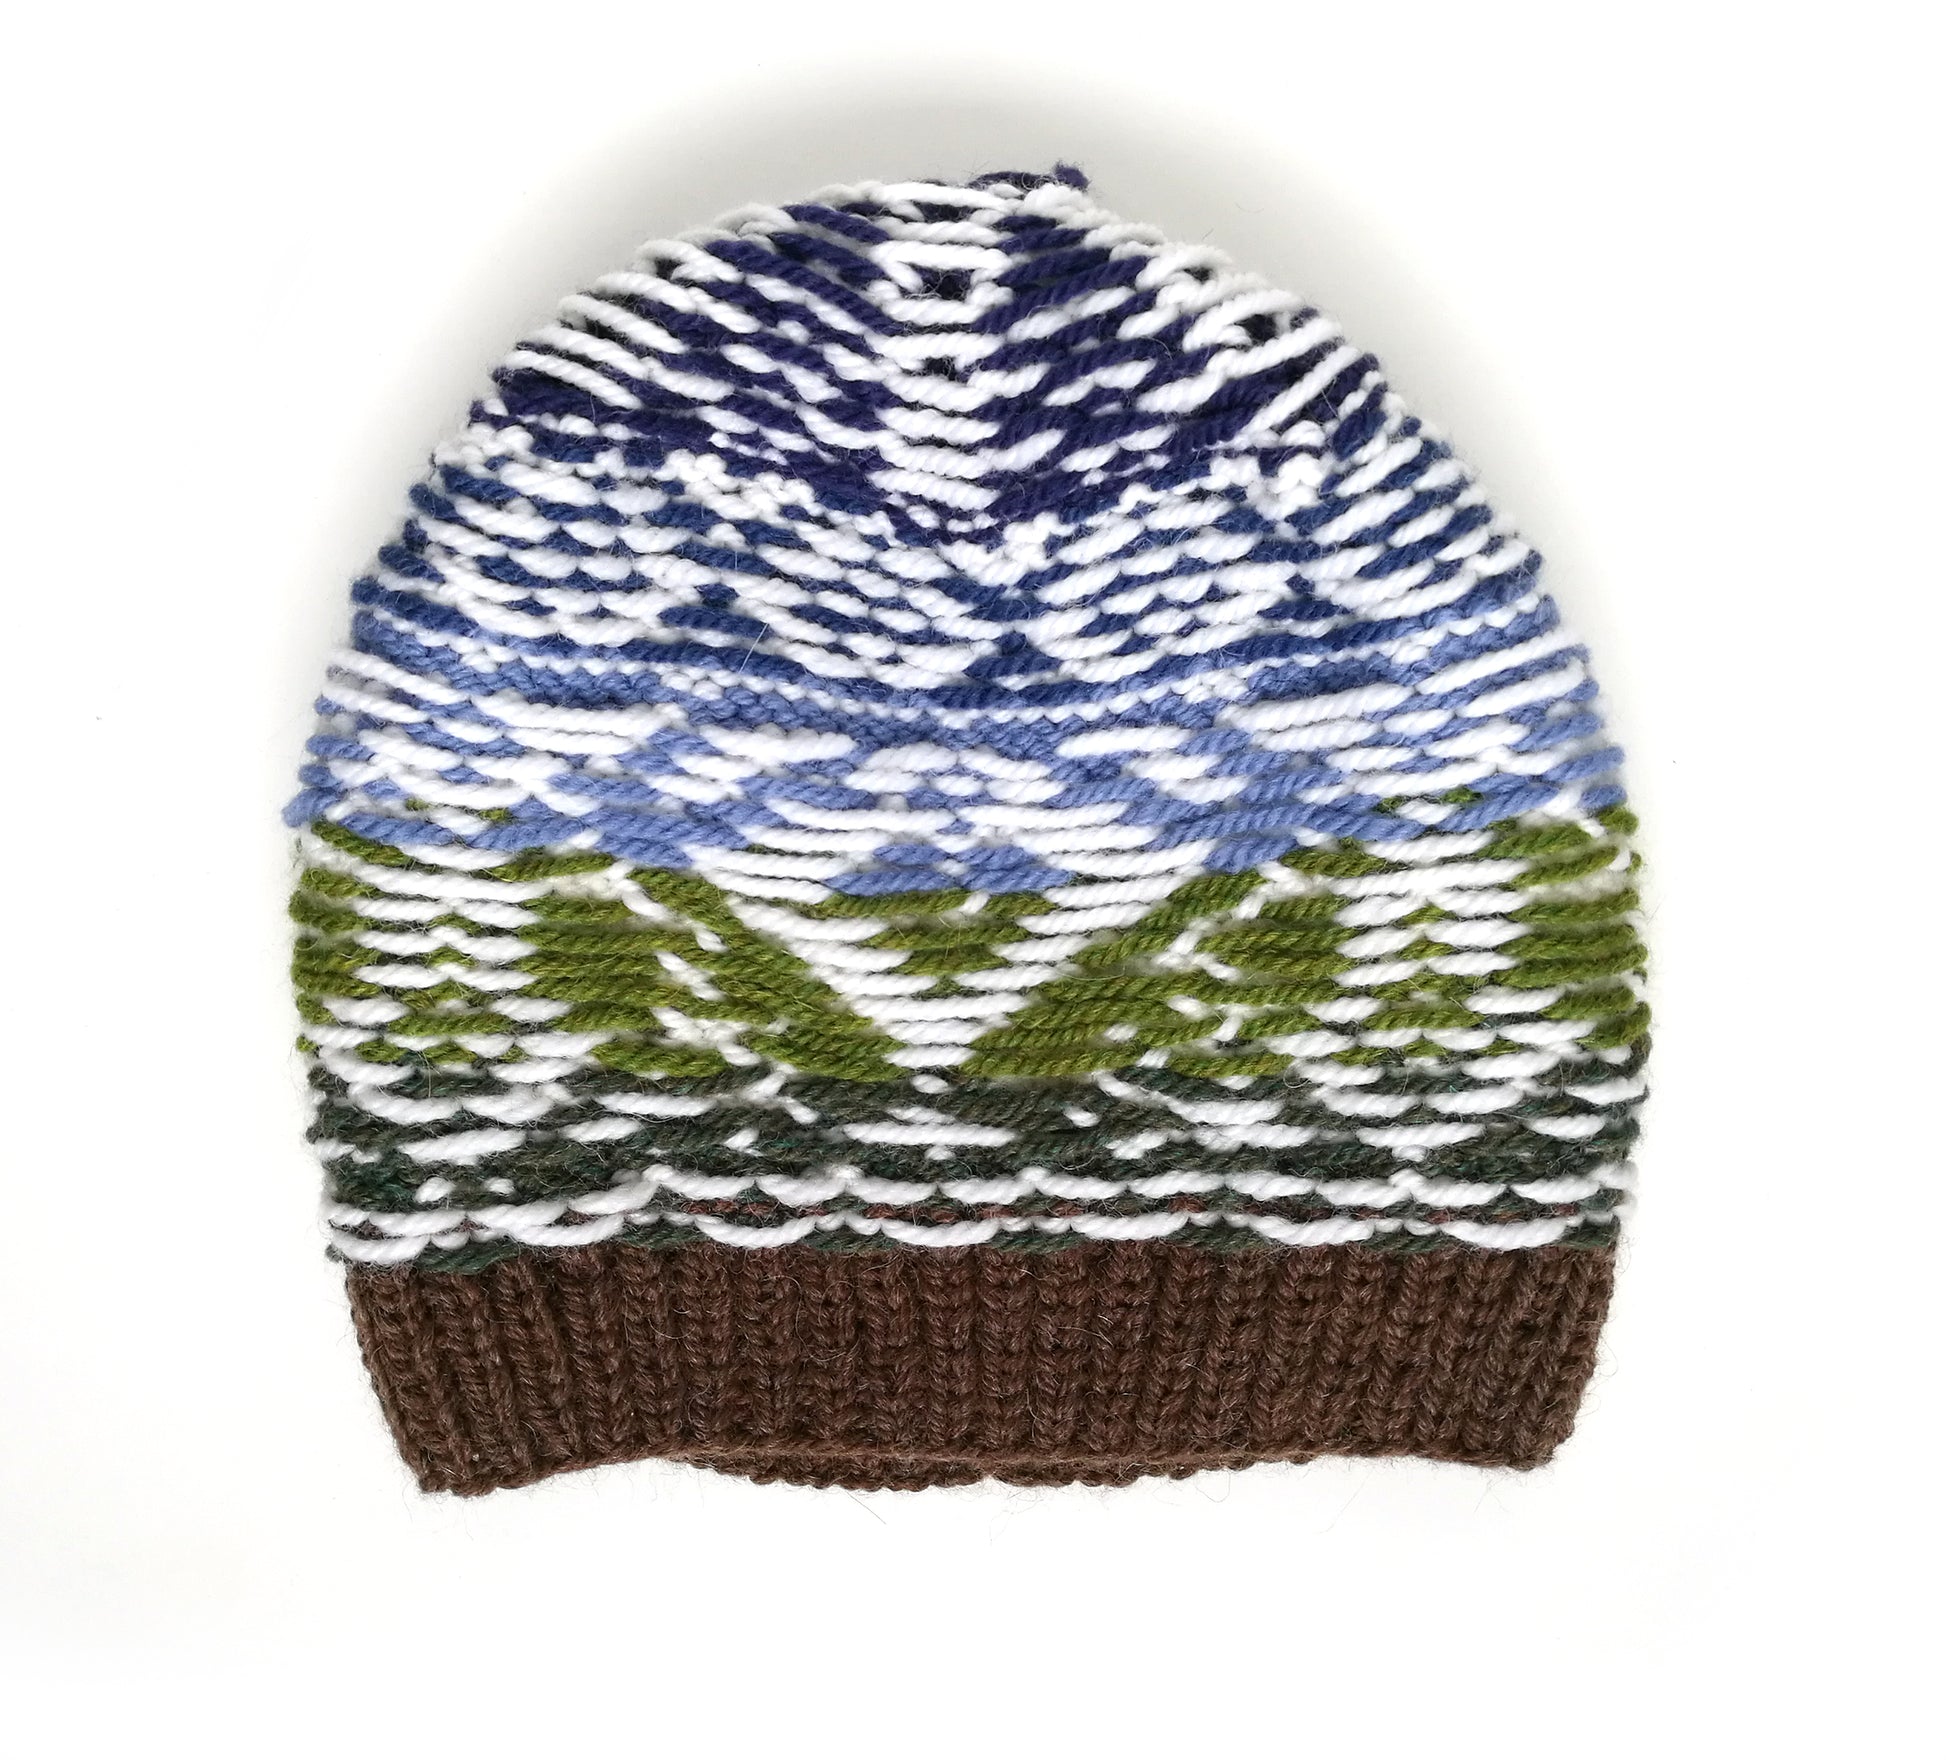 green, brown, blue and white wool hand-knitted Fair Isle beanie hat in Bunny Rabbit knitting pattern, wrong side